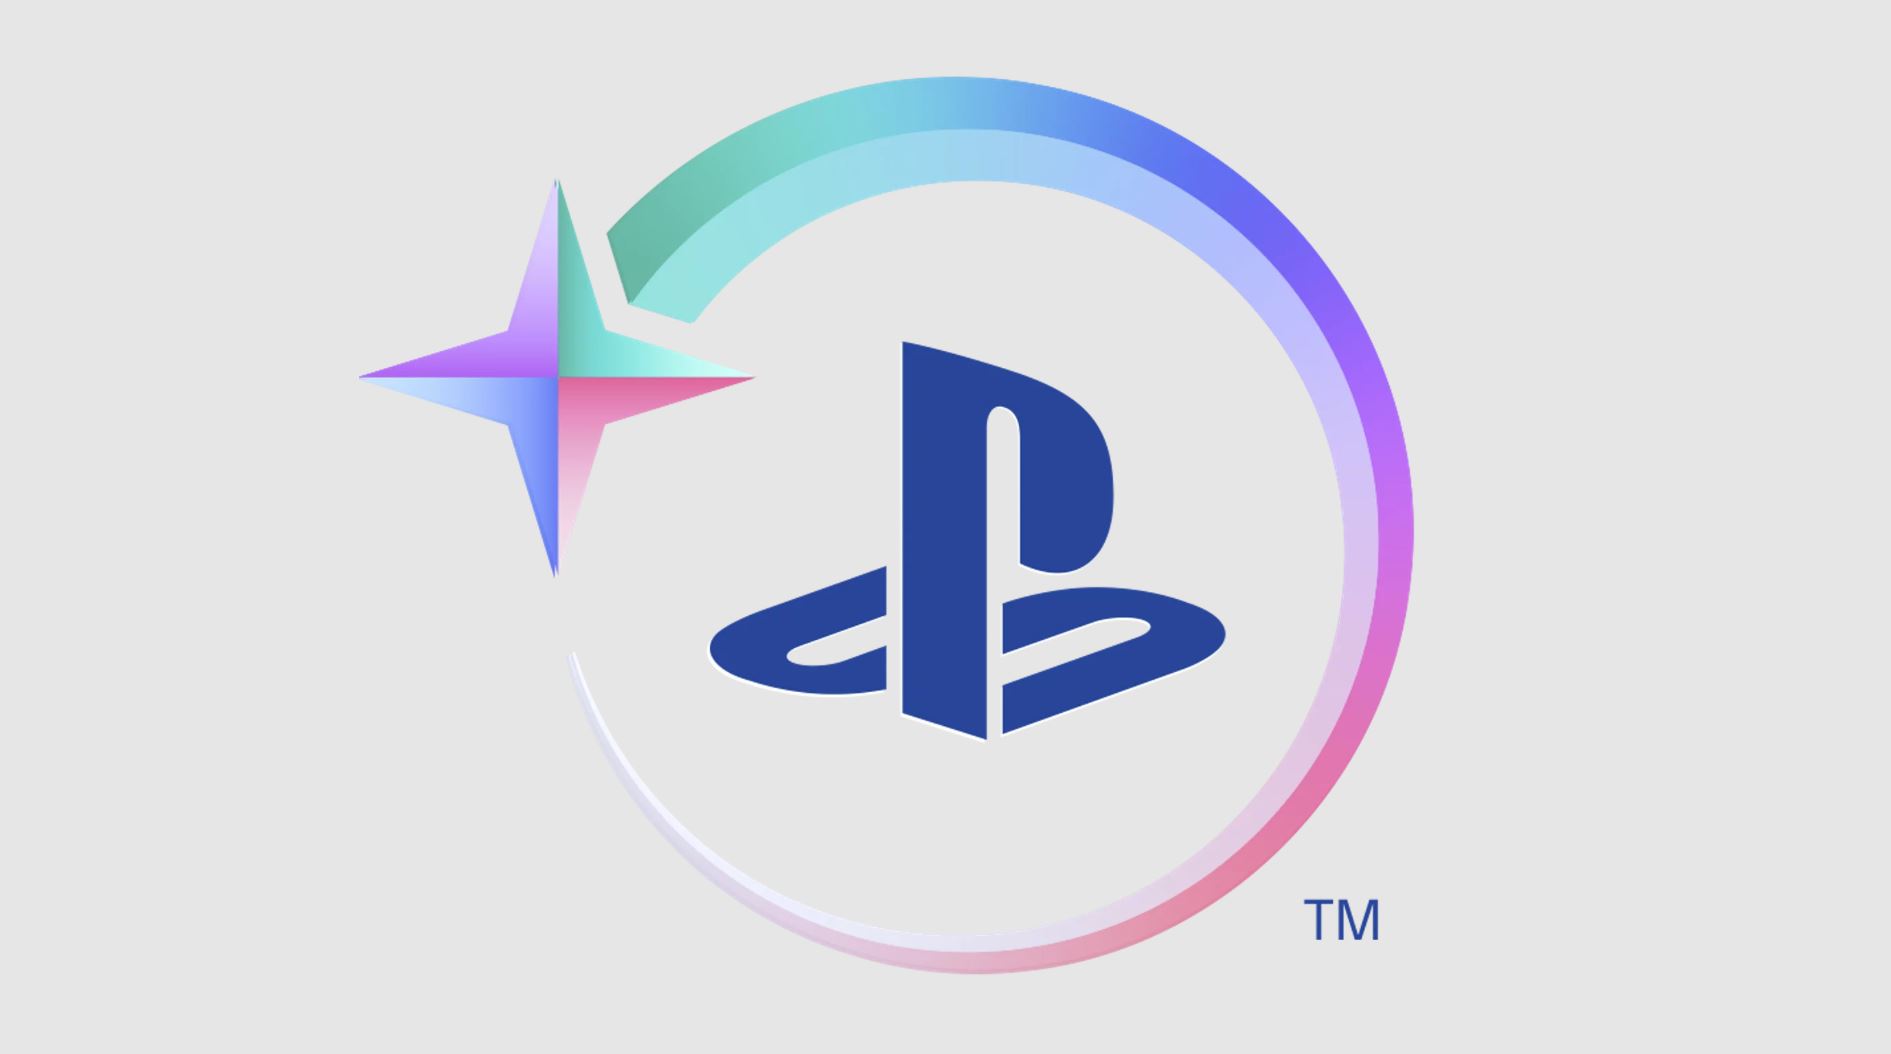 PlayStation Stars is giving top members 'priority' chat support in